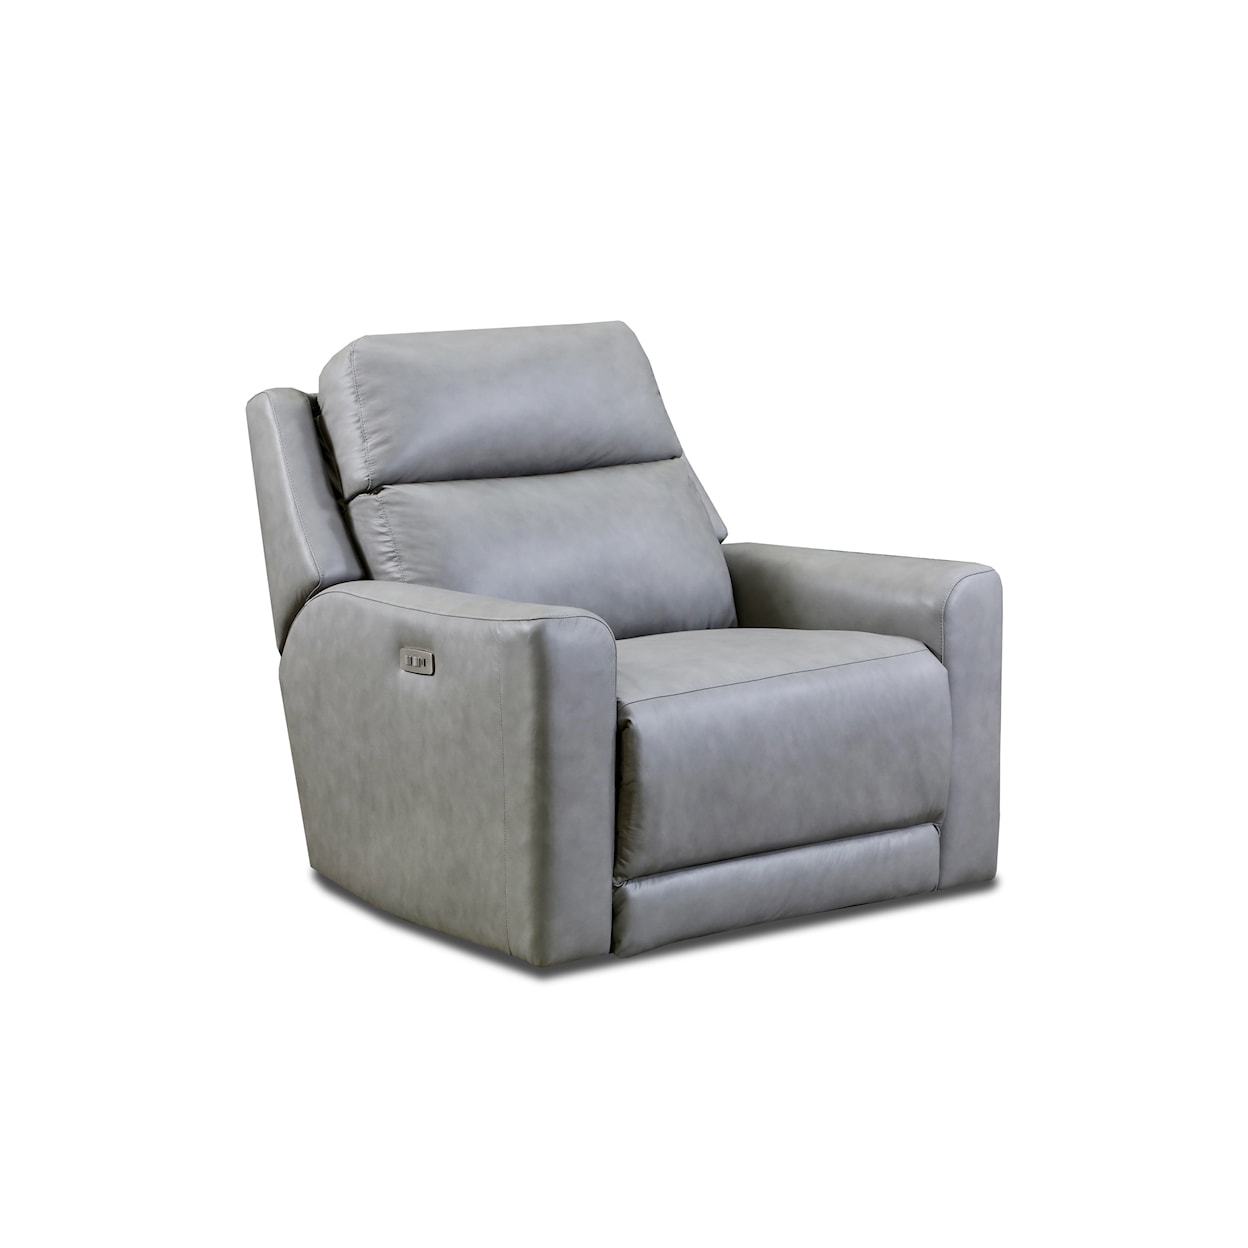 Powell's Motion Social Club Power Hdrst Chair & 1/2 Recliner